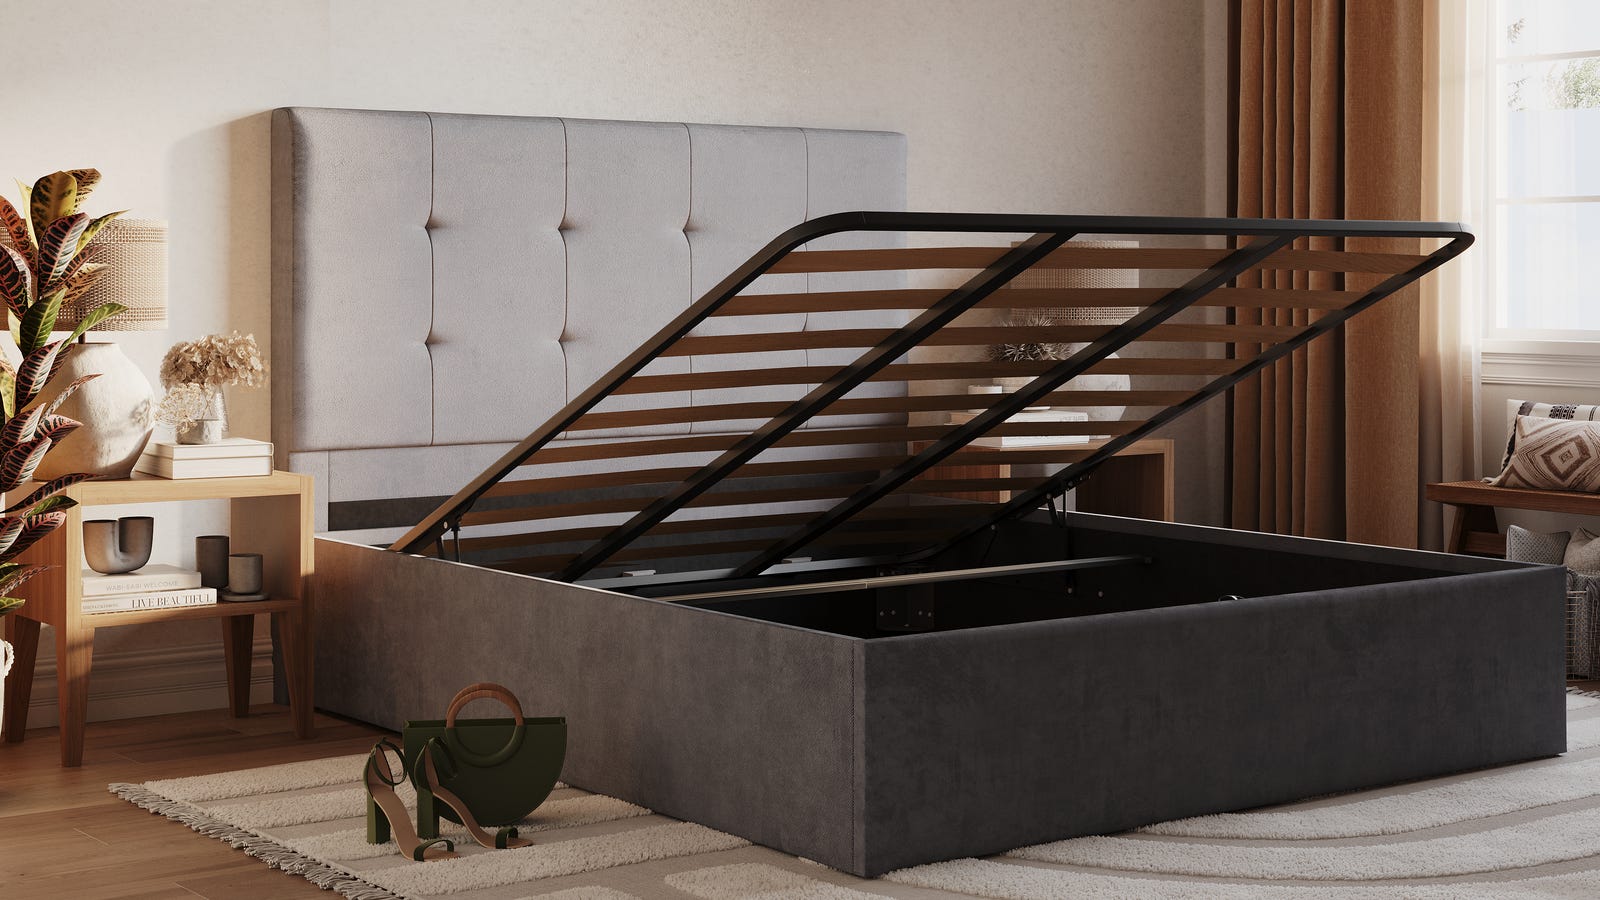 Emma Ottoman Bed - extra storage space.